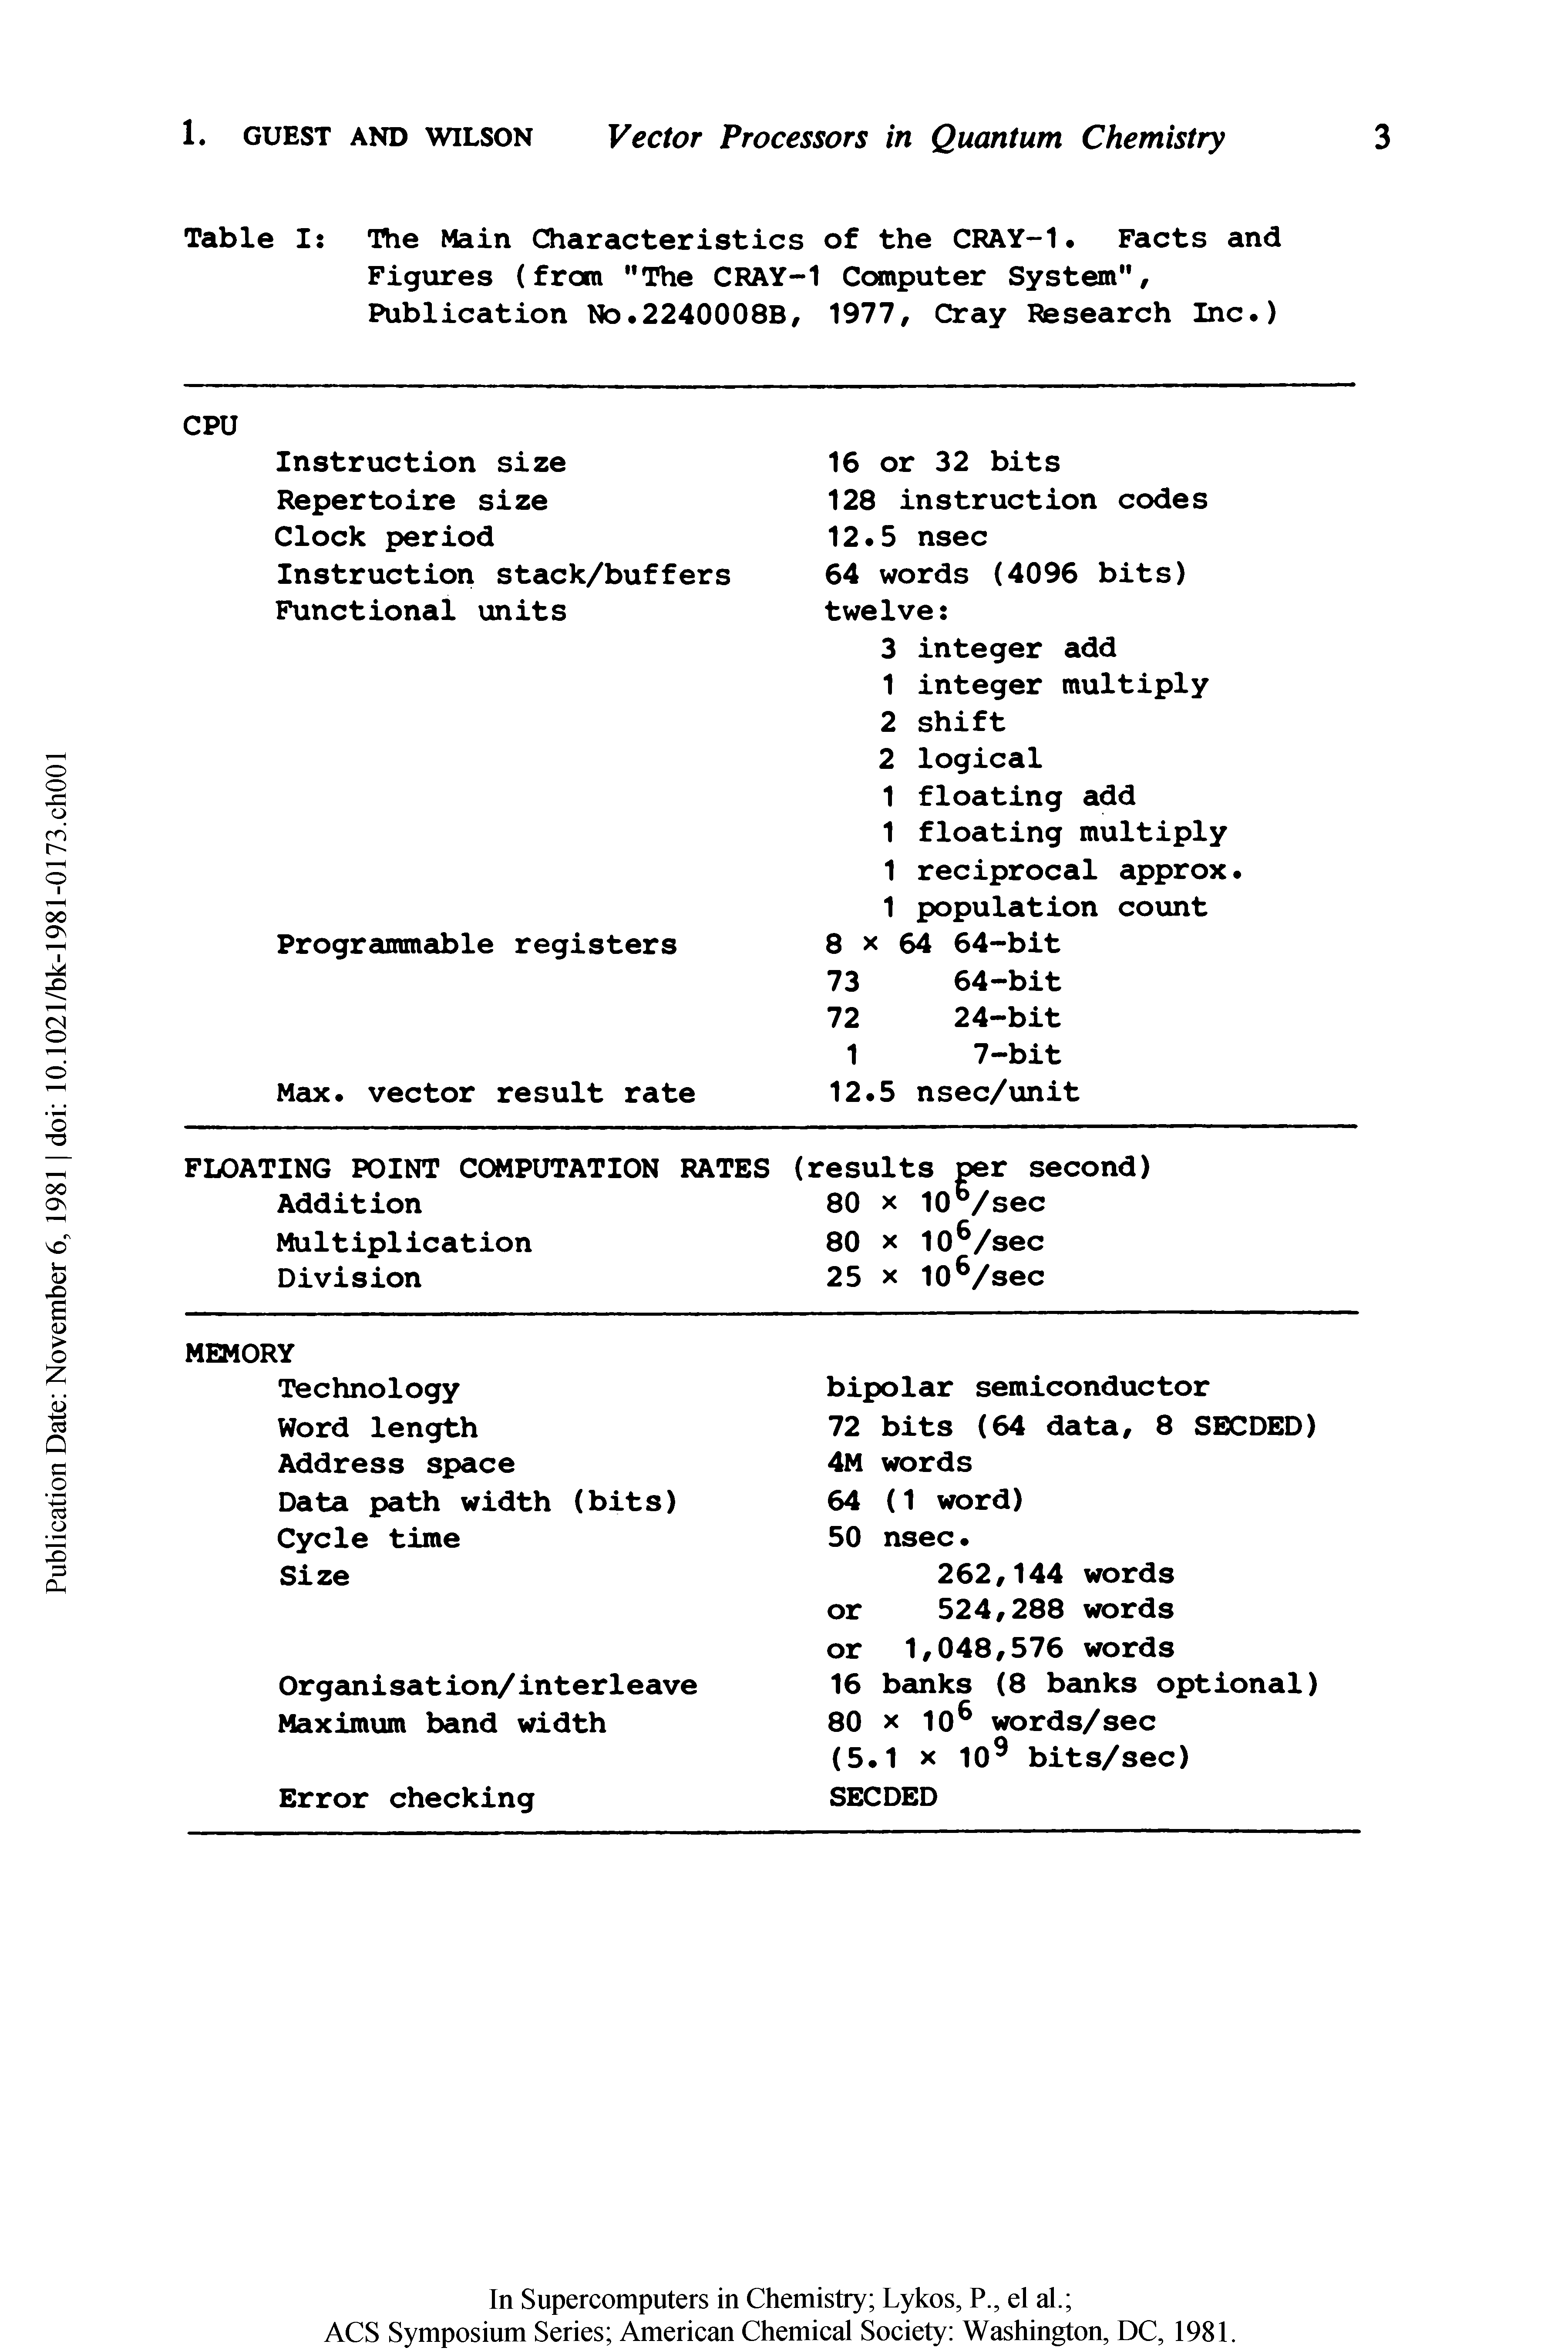 Table I The Main Characteristics of the CRAY-1. Facts and Figures (from "The CRAY-1 Computer System", Publication NO.2240008B, 1977, Cray Research Inc.)...